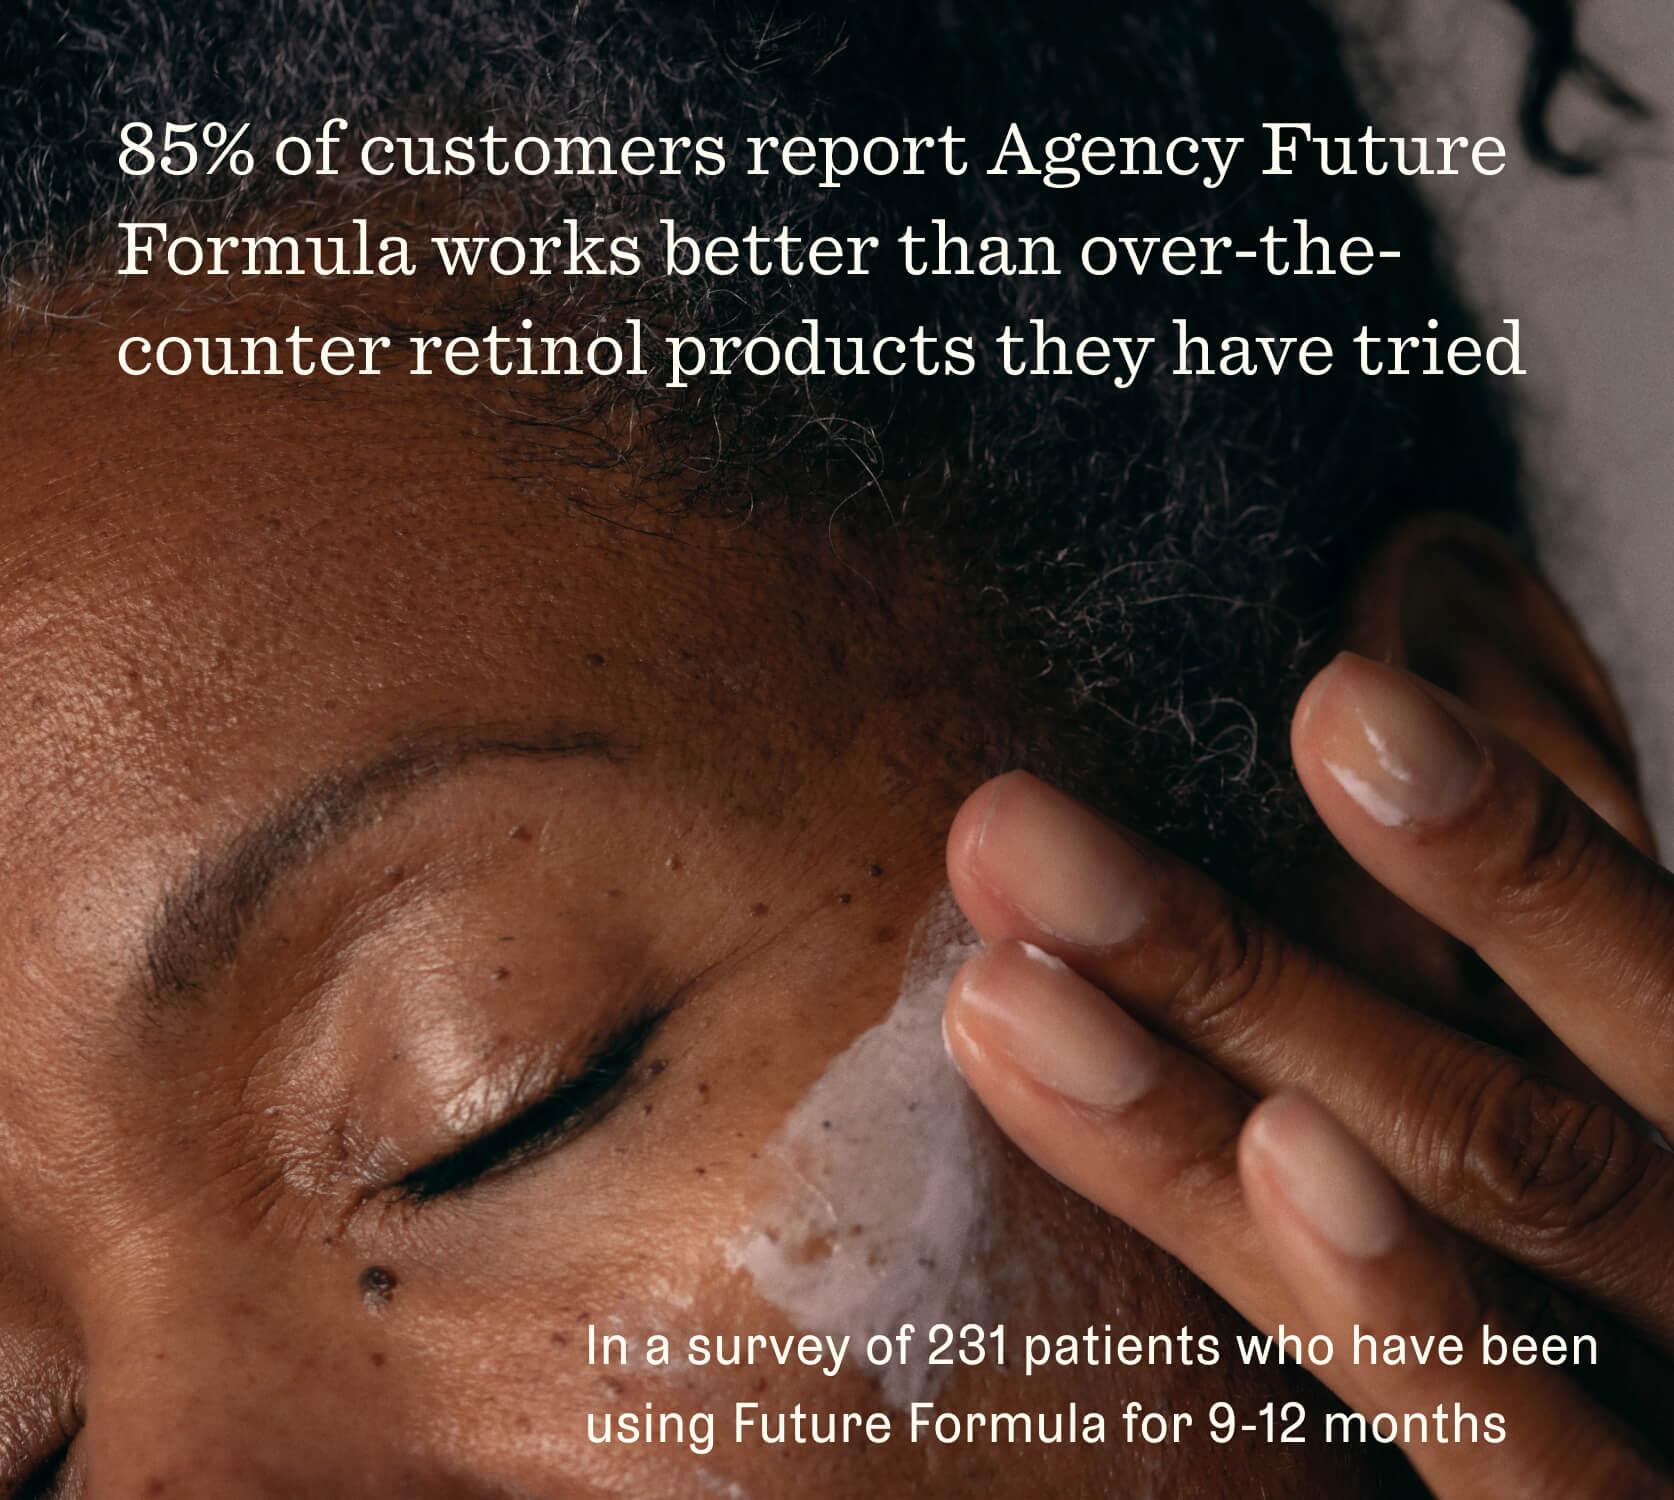 Woman putting product on. Claim: 85% of customers report Agency Future Formula works better than over-the-counter retinol products they have tried. In a survey of 231 patients who have been using Future Formula for 9-12 months.